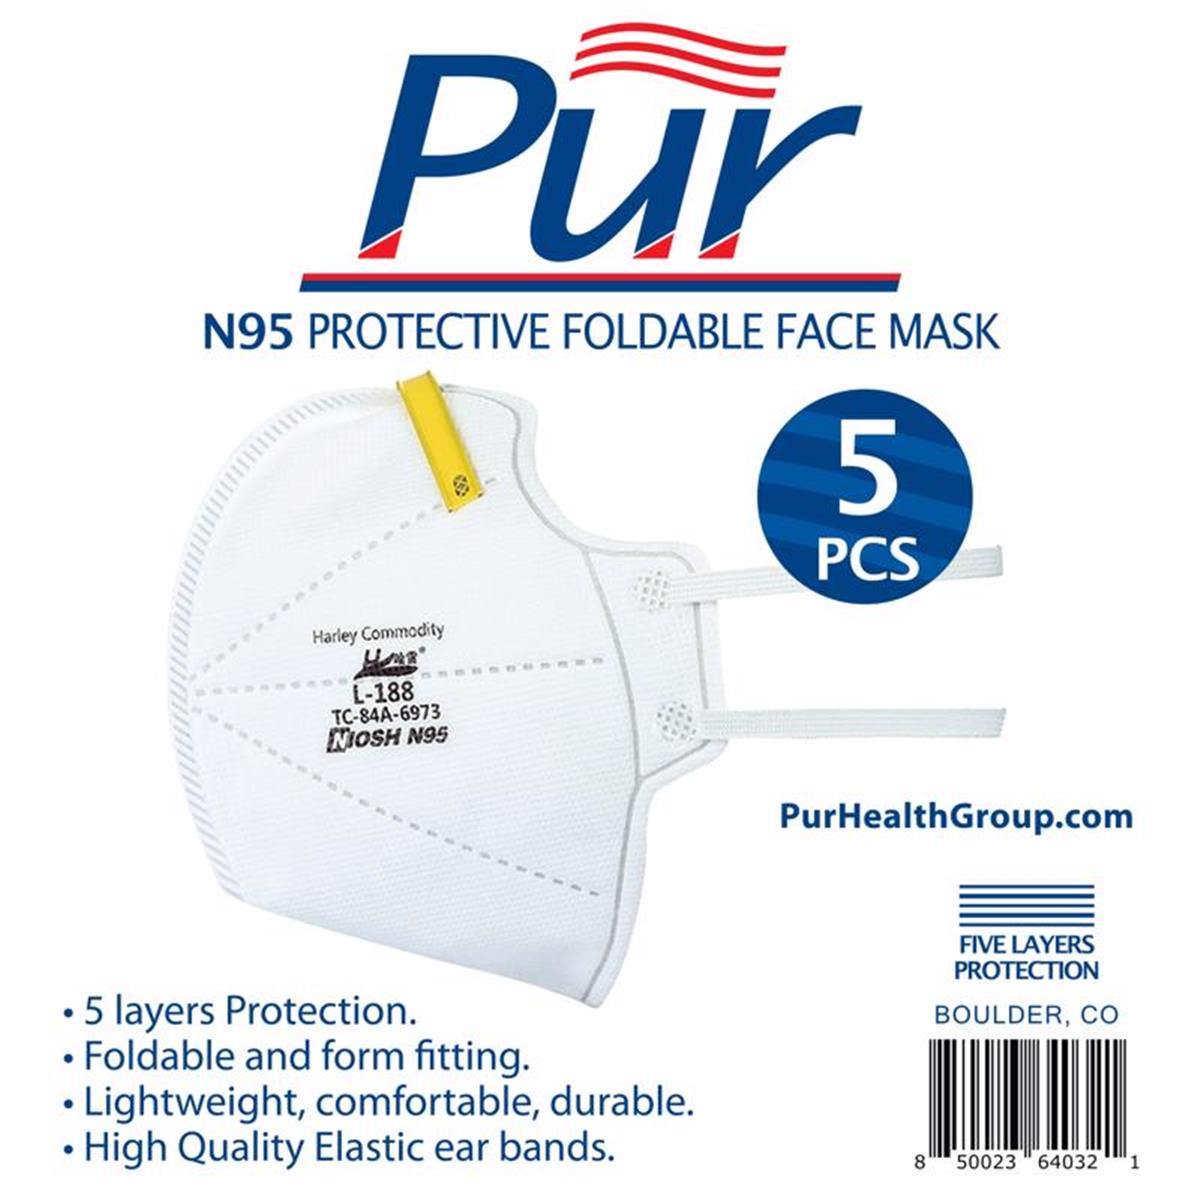 2020054 N95 General pose Face Mask, White - One Size - Pack of 5 -  Pur